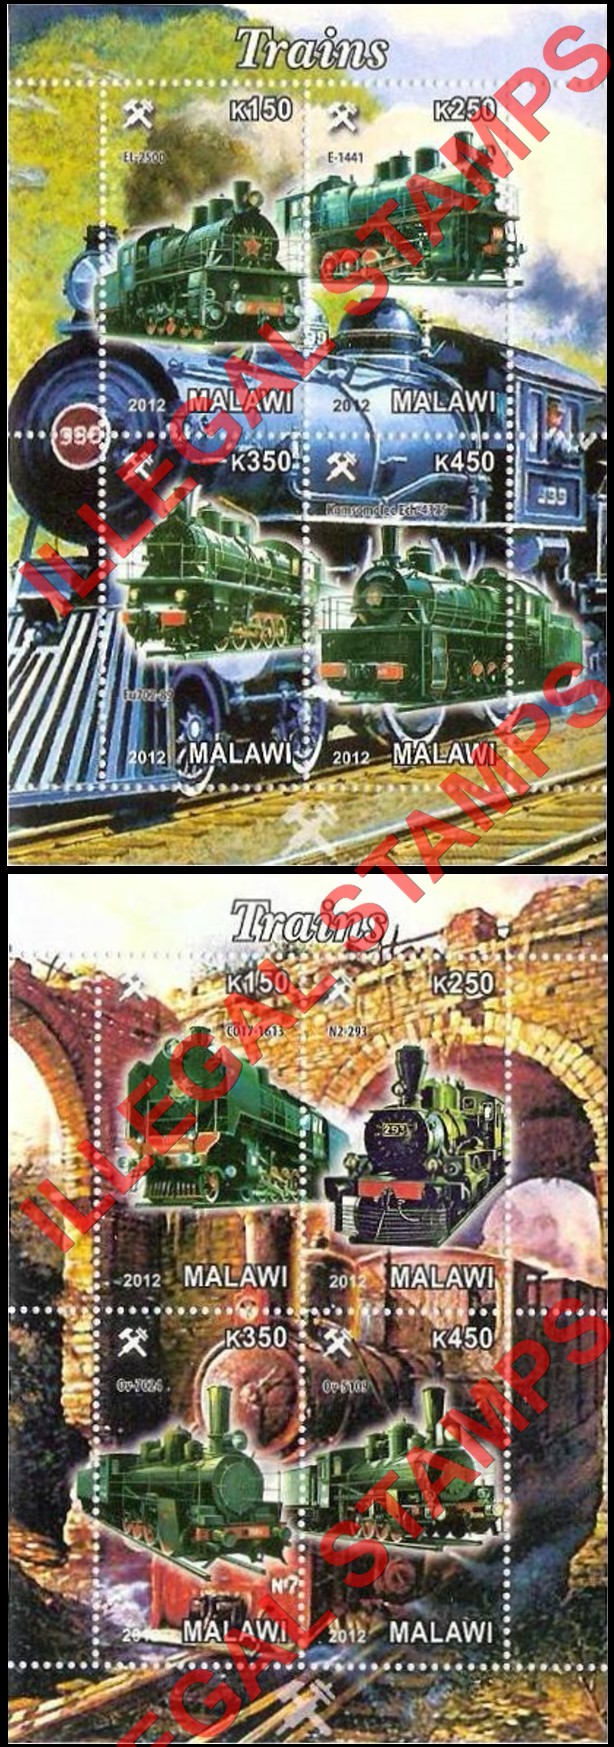 Malawi 2012 Trains Illegal Stamp Souvenir Sheets of 4 (Part 5)